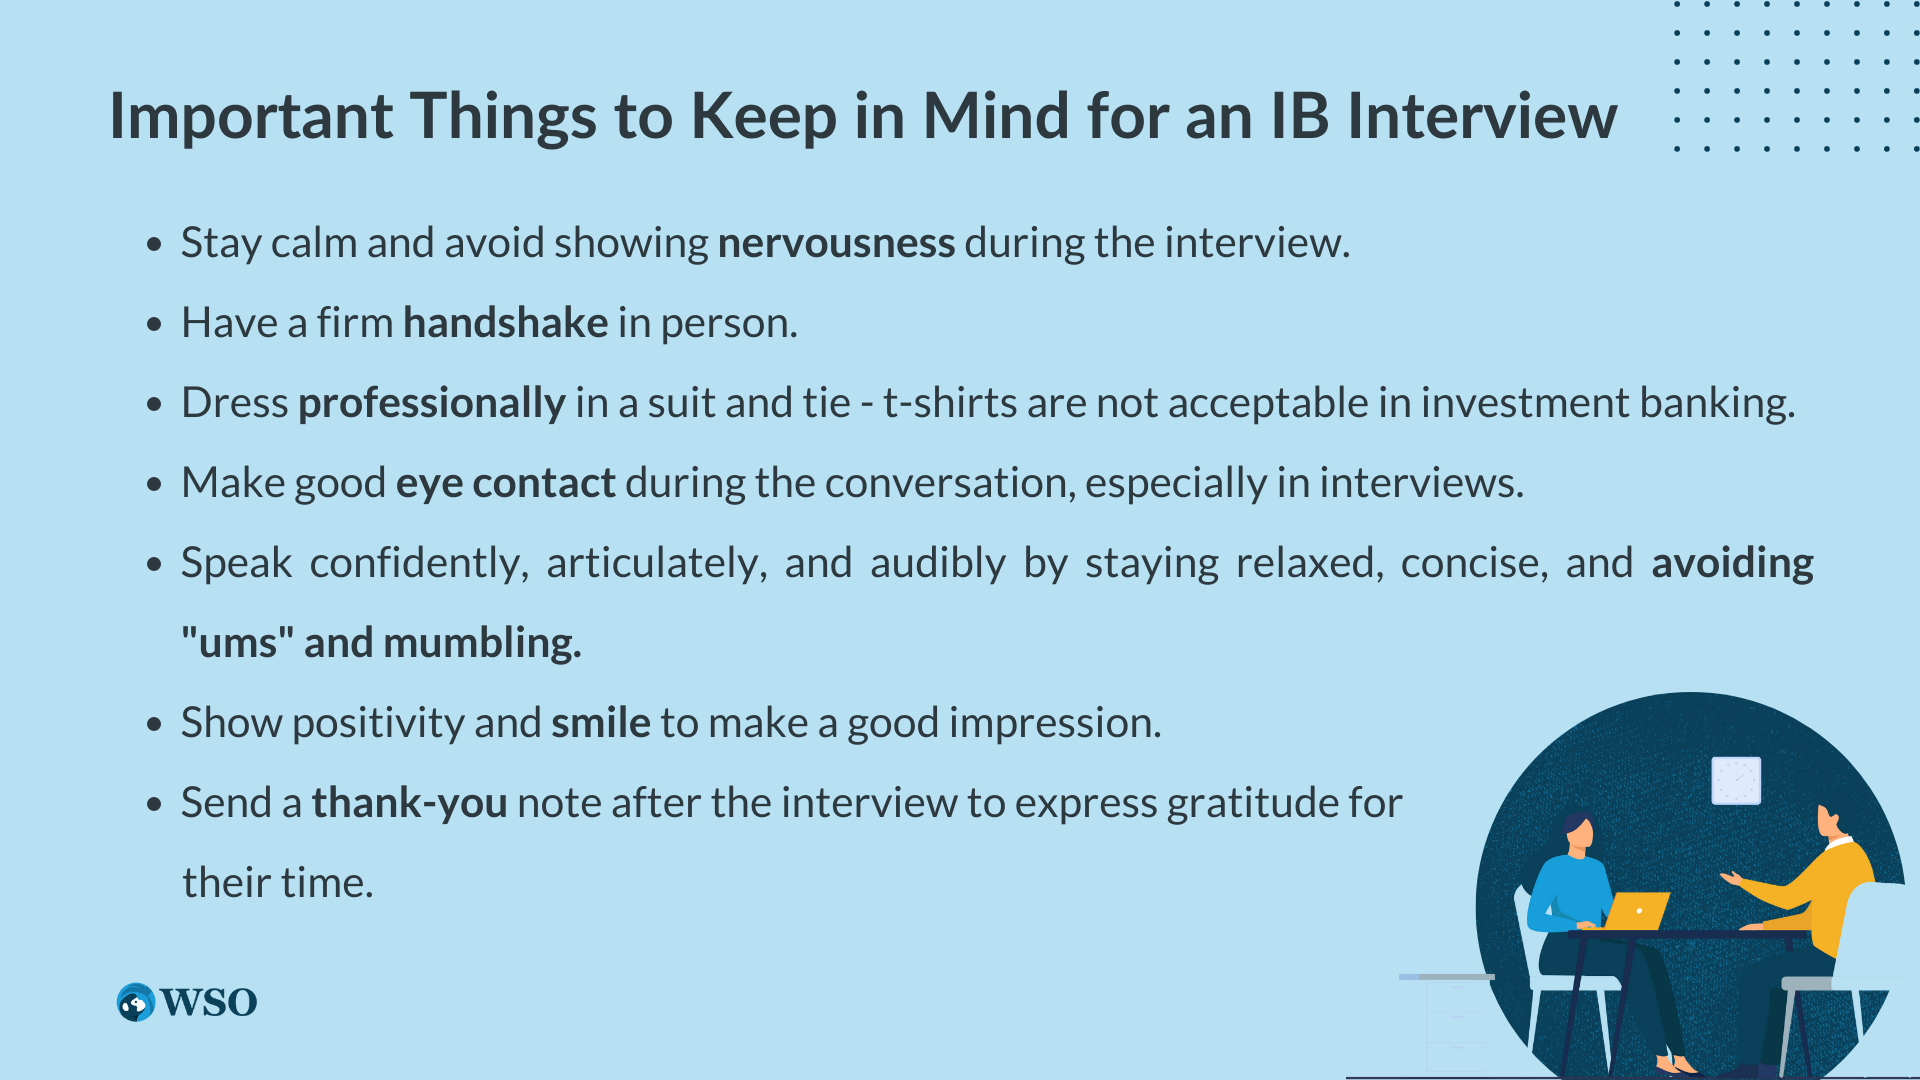 Important Things to Keep in Mind for an IB Interview: